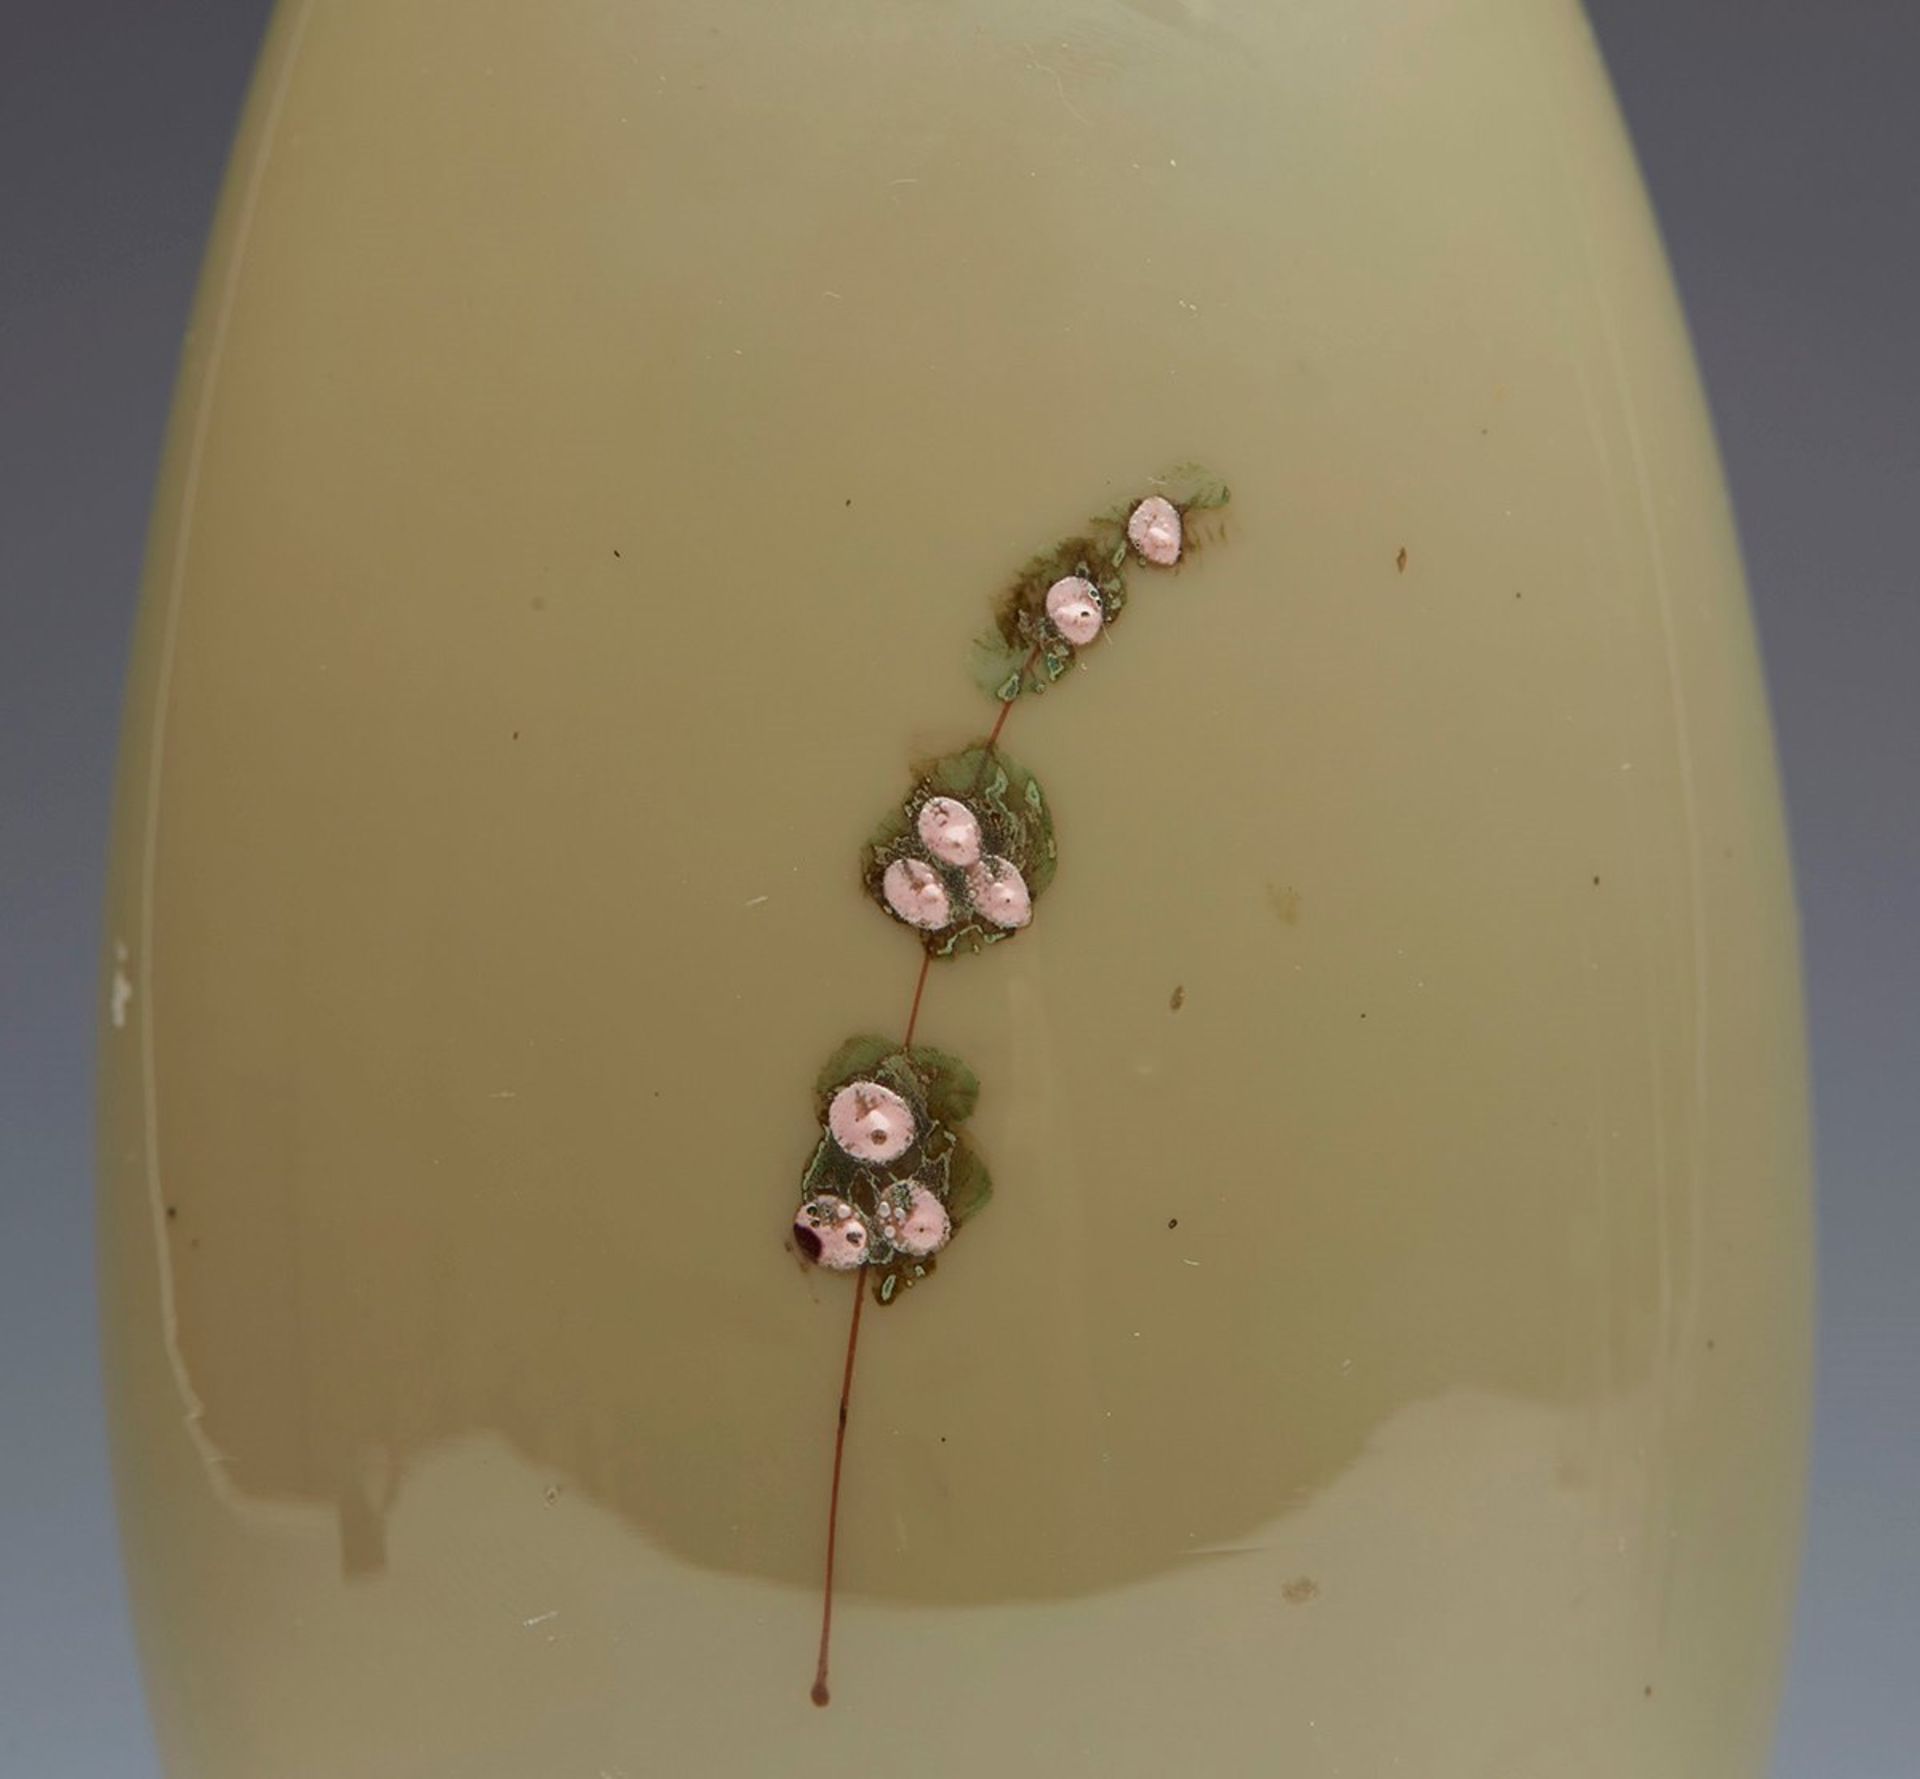 ANTIQUE VICTORIAN FLORAL ENAMEL PAINTED GLASS VASE 19TH C.   DIMENSIONS   Height 23cm, Diameter 8, - Image 5 of 6